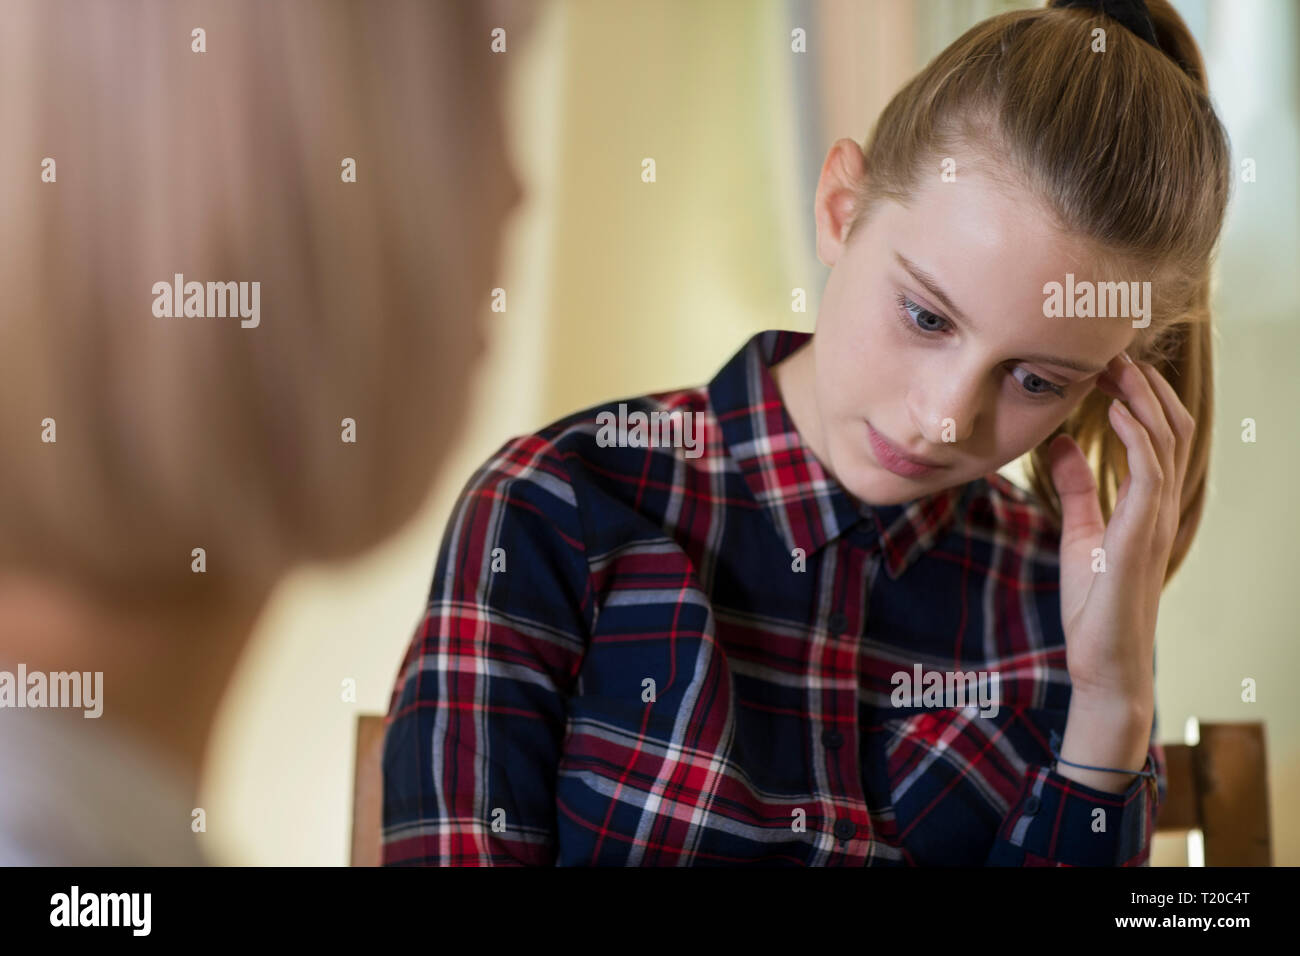 Depressed Teenage Girl Meeting With Counselor Stock Photo